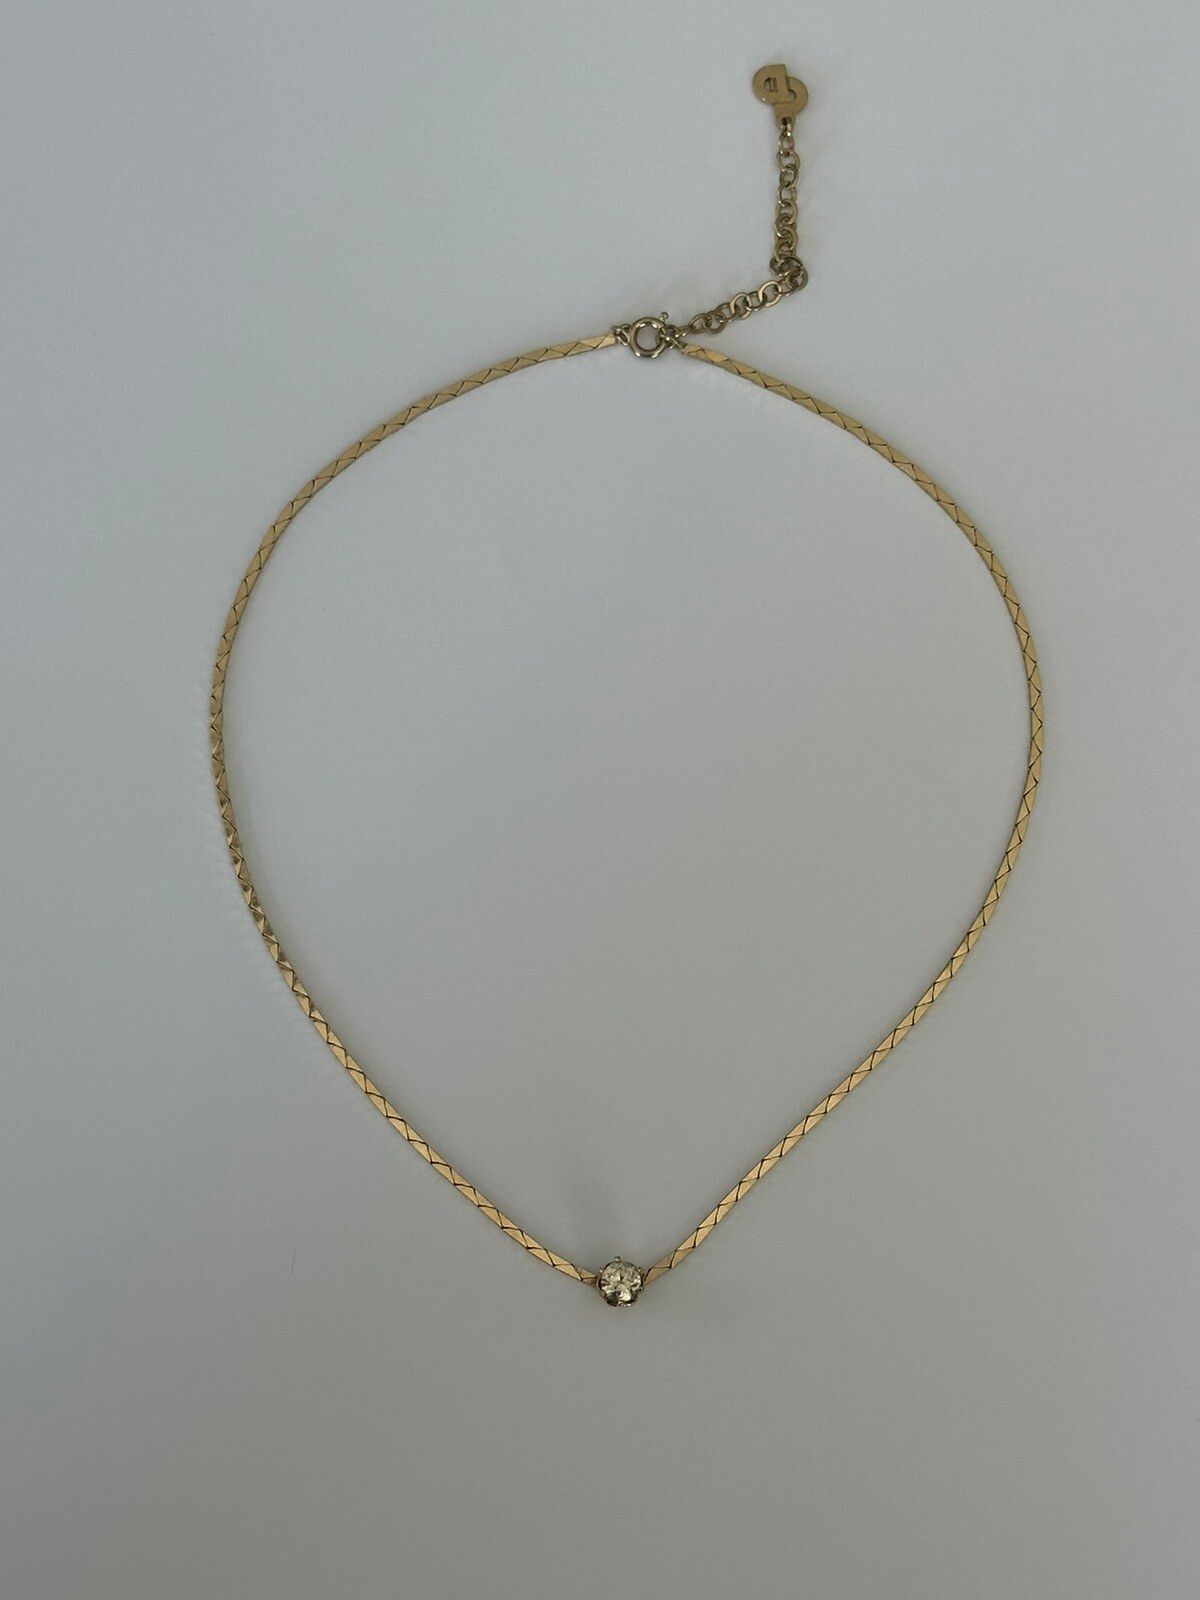 Dior Vintage Christian Dior Gold / “Diamond” Necklace Size ONE SIZE - 1 Preview